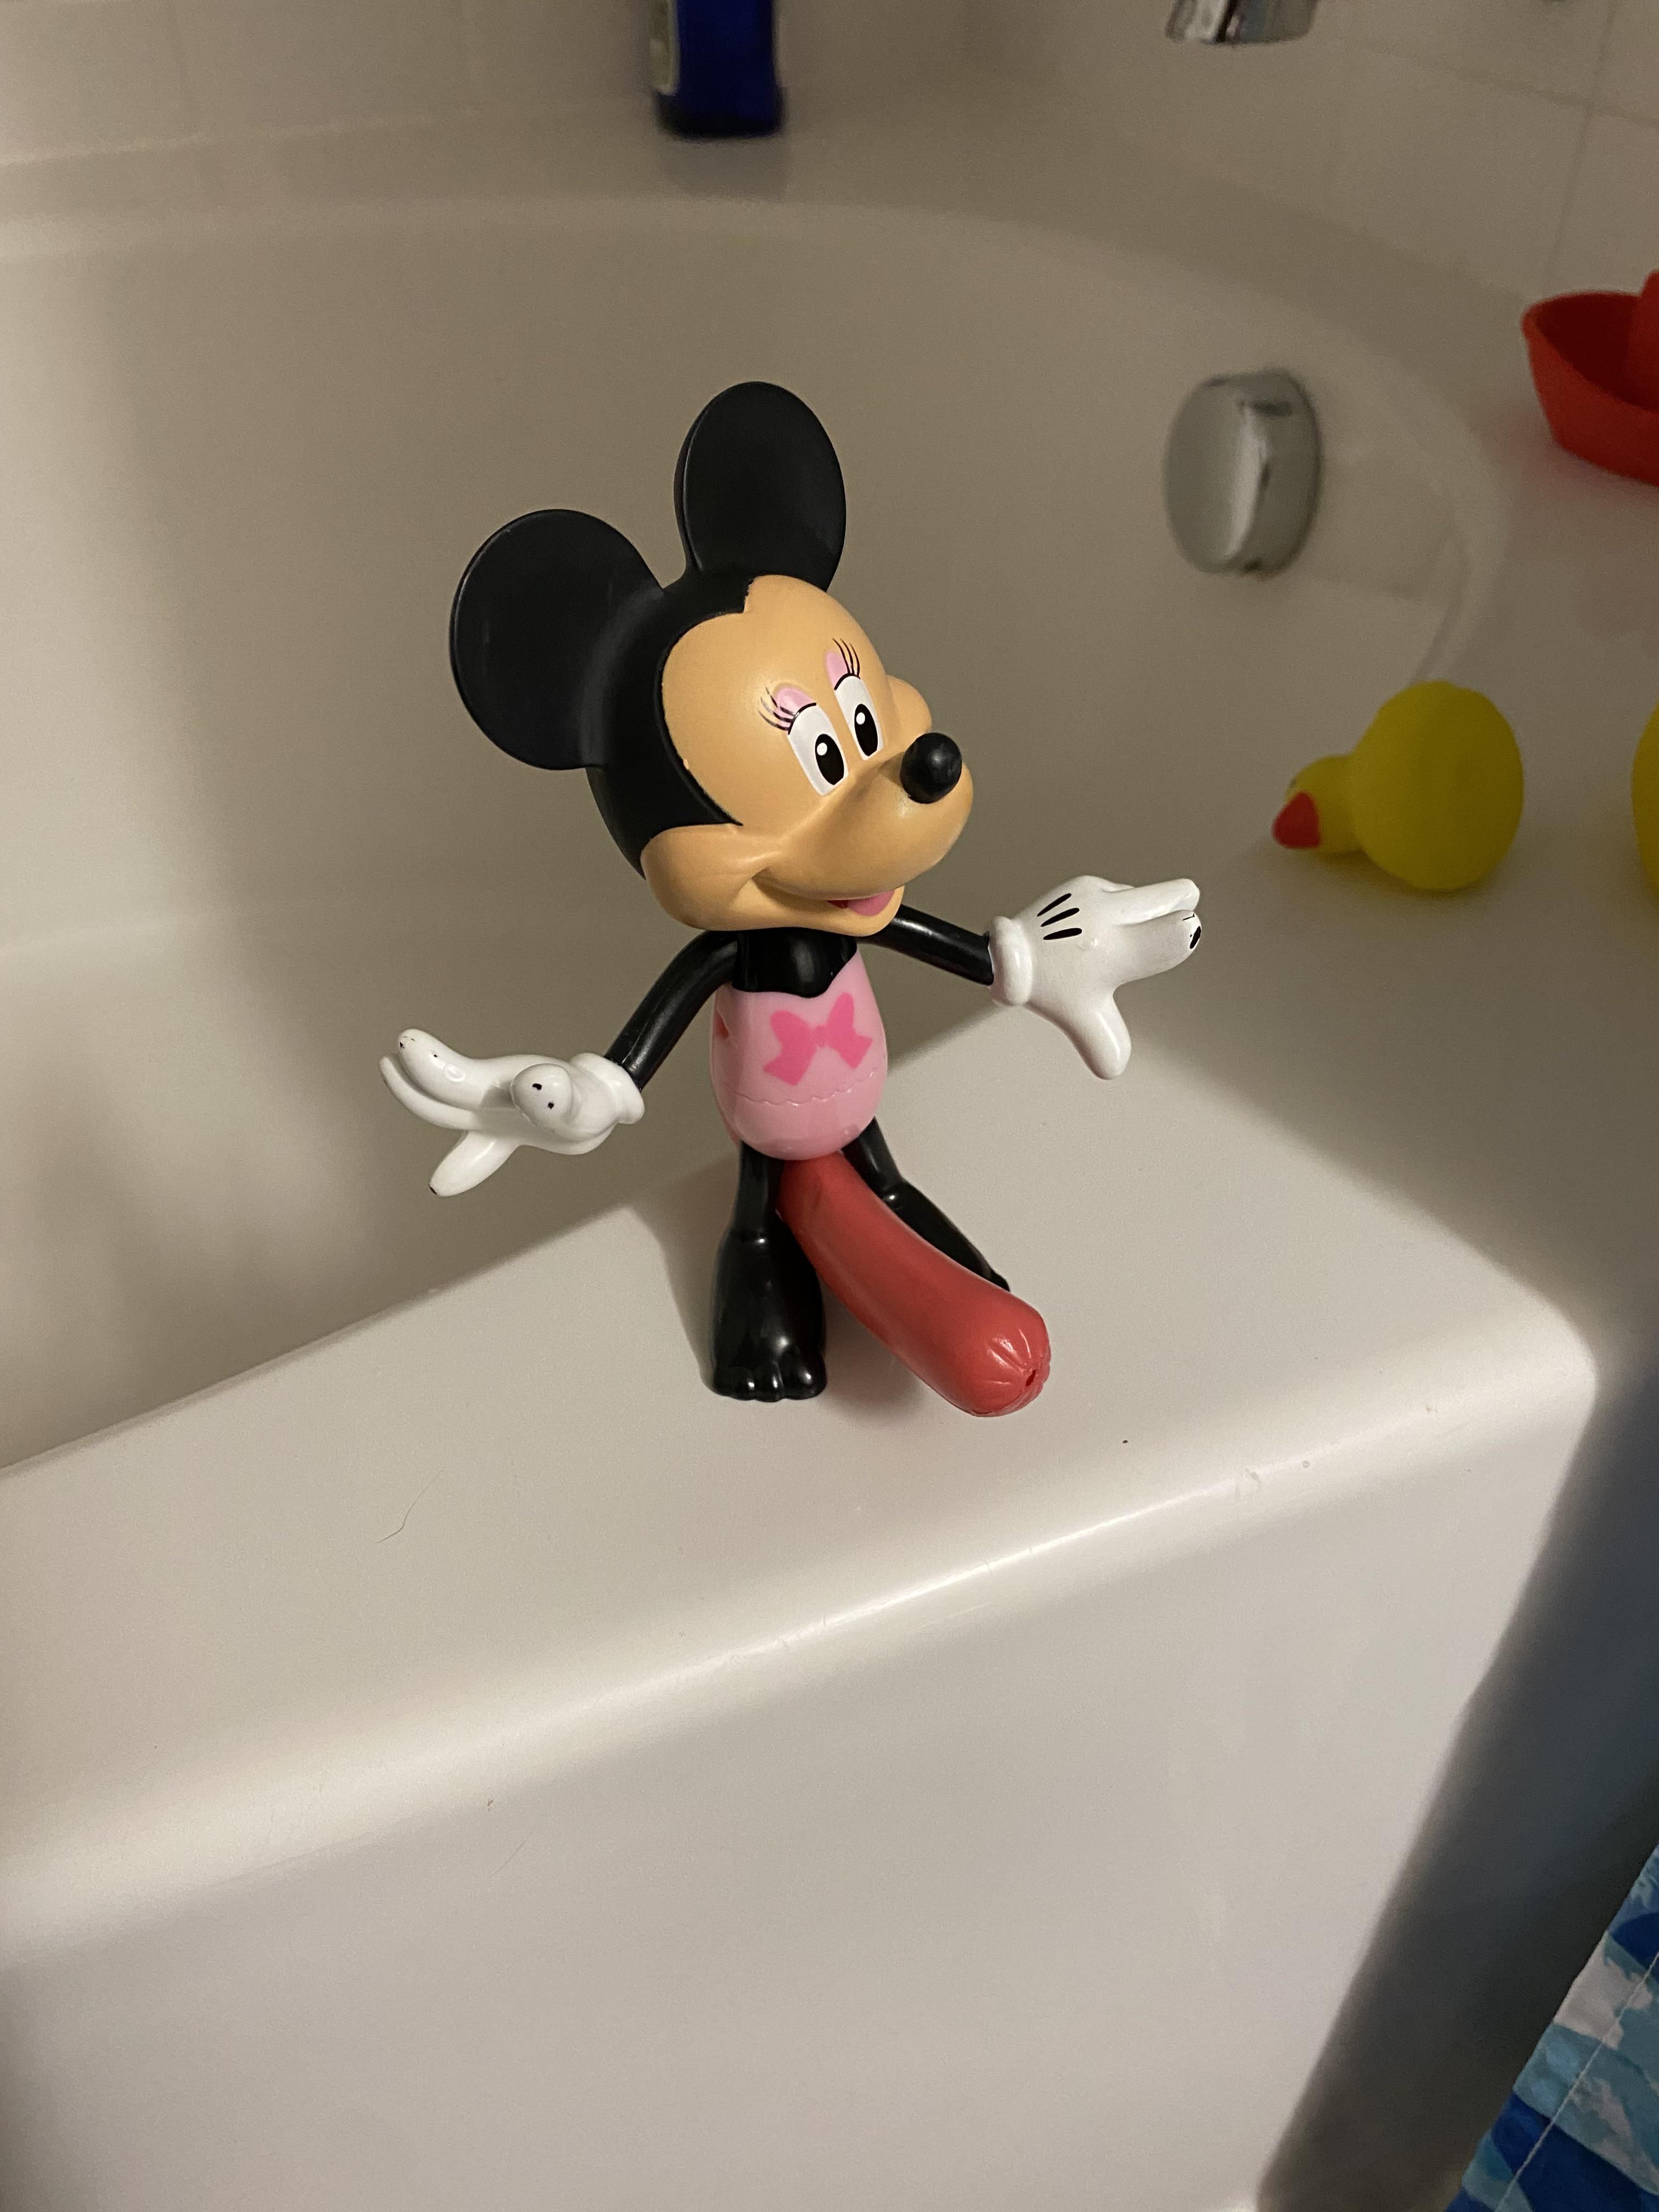 My daughter said she had to give Minnie Mouse a floaty before she could get in the bath tonight. Boy was I not ready for this.